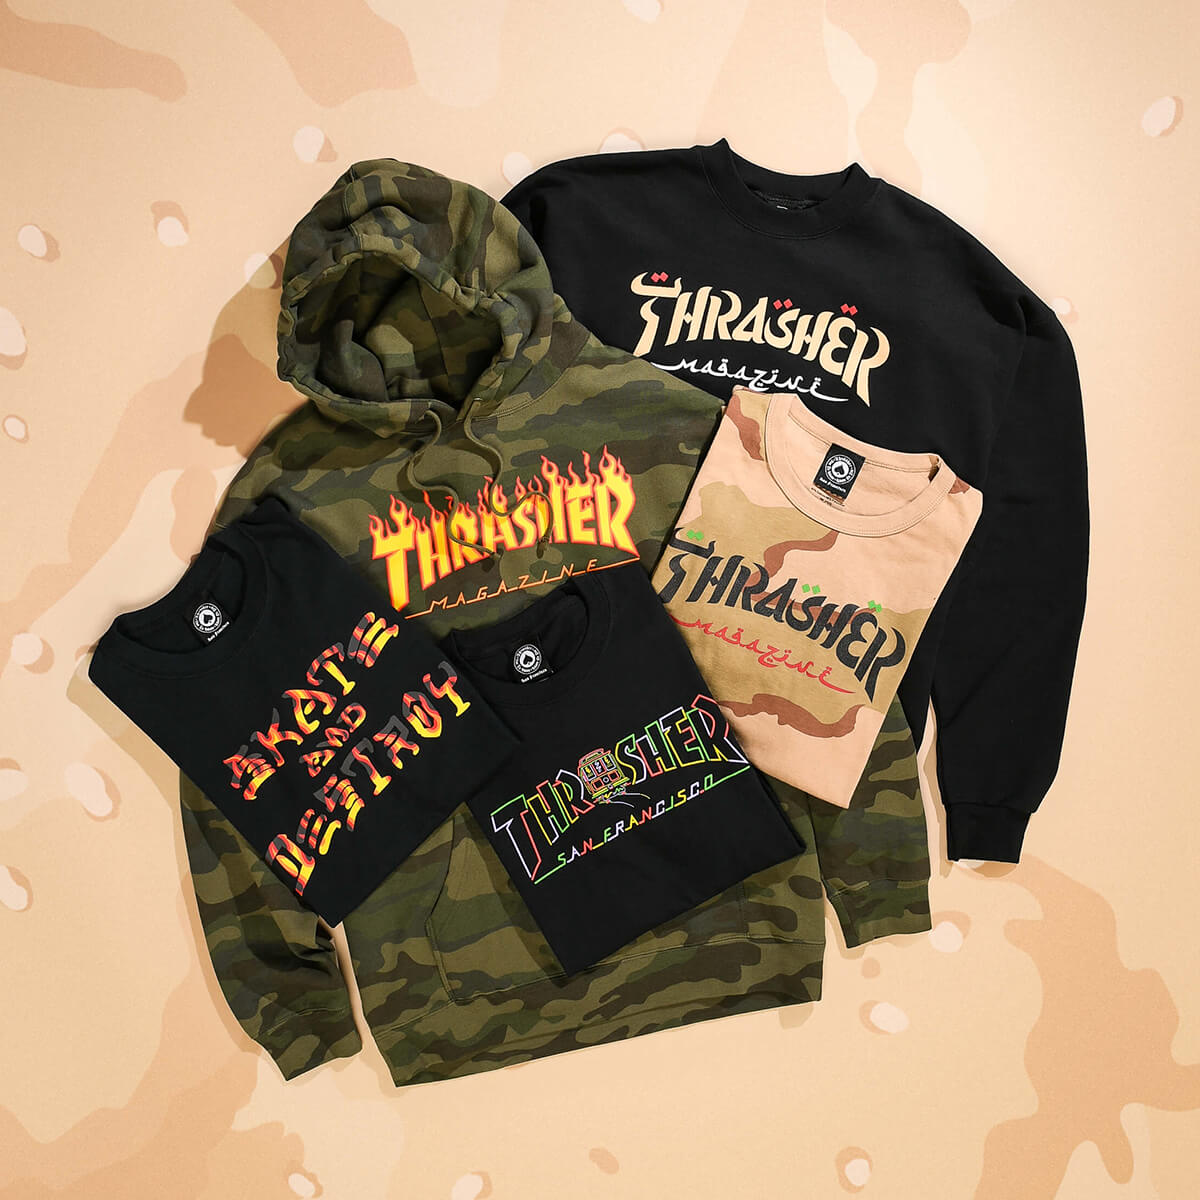 NEW THRASHER STYLES AND TOP SELLERS - SHOP THRASHER